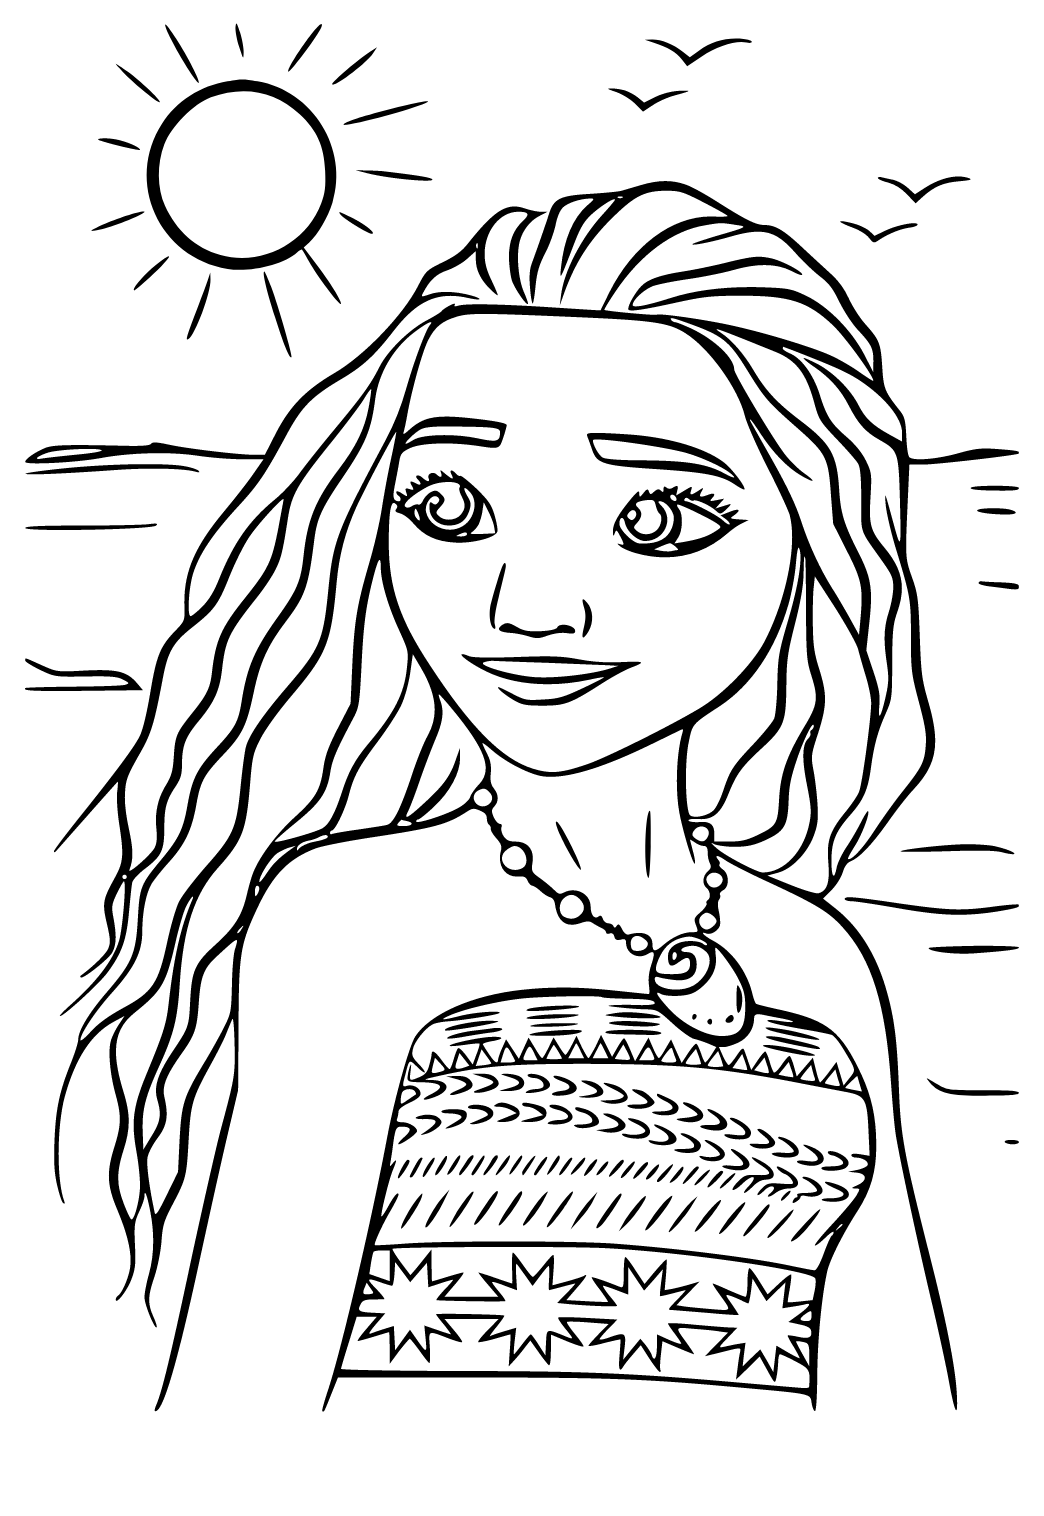 Free Printable Moana Sun Coloring Page for Adults and Kids - Lystok.com